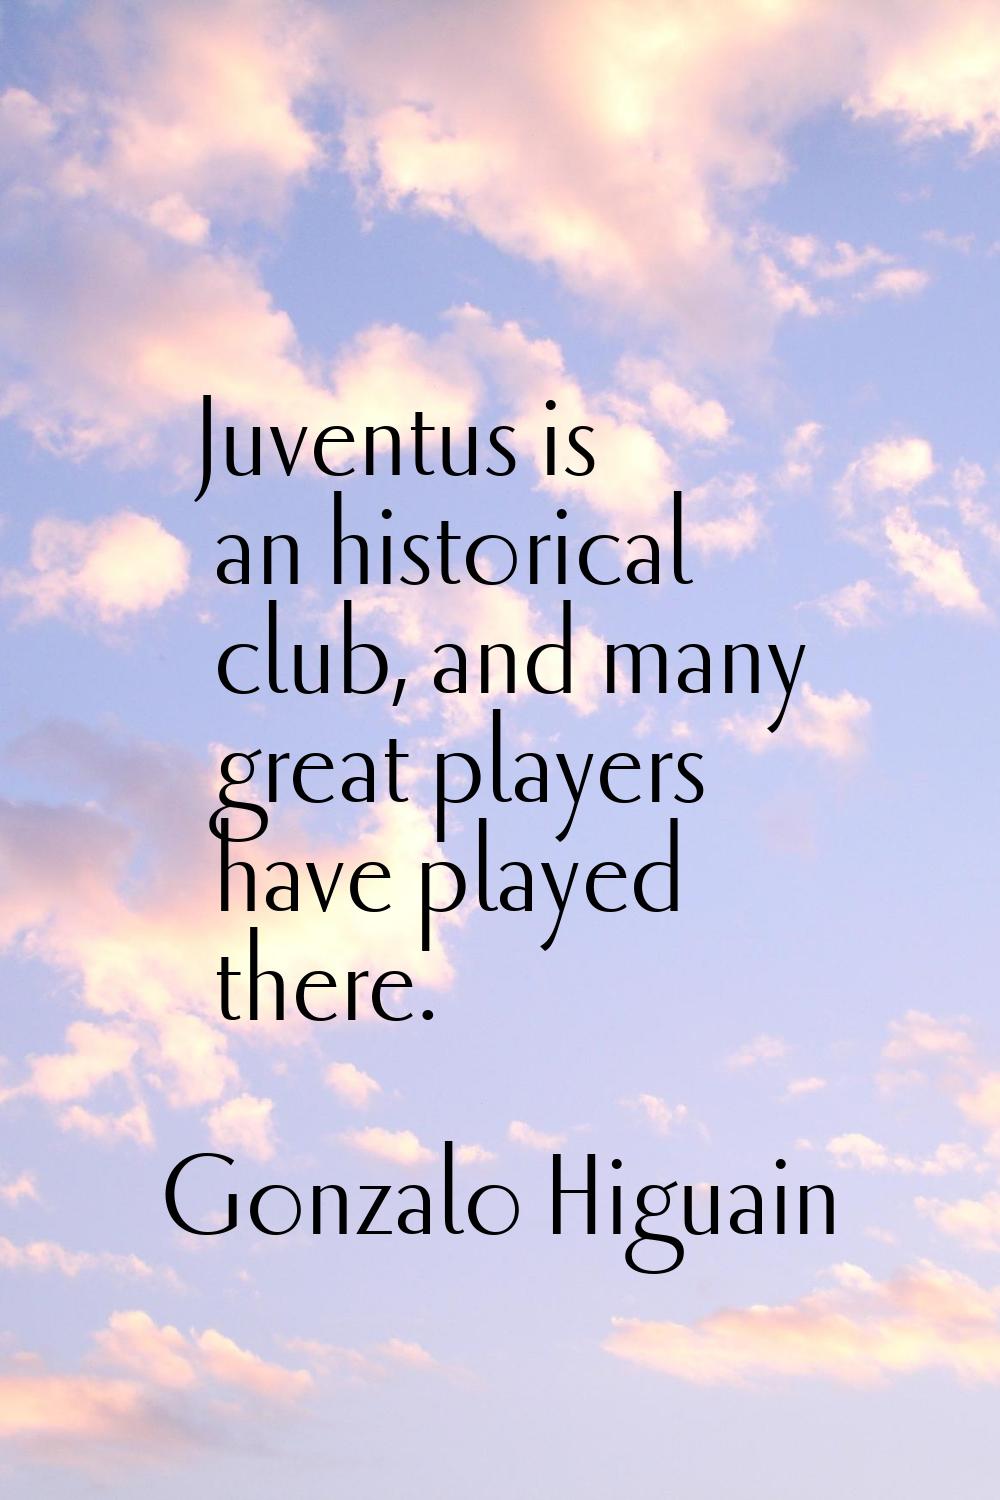 Juventus is an historical club, and many great players have played there.